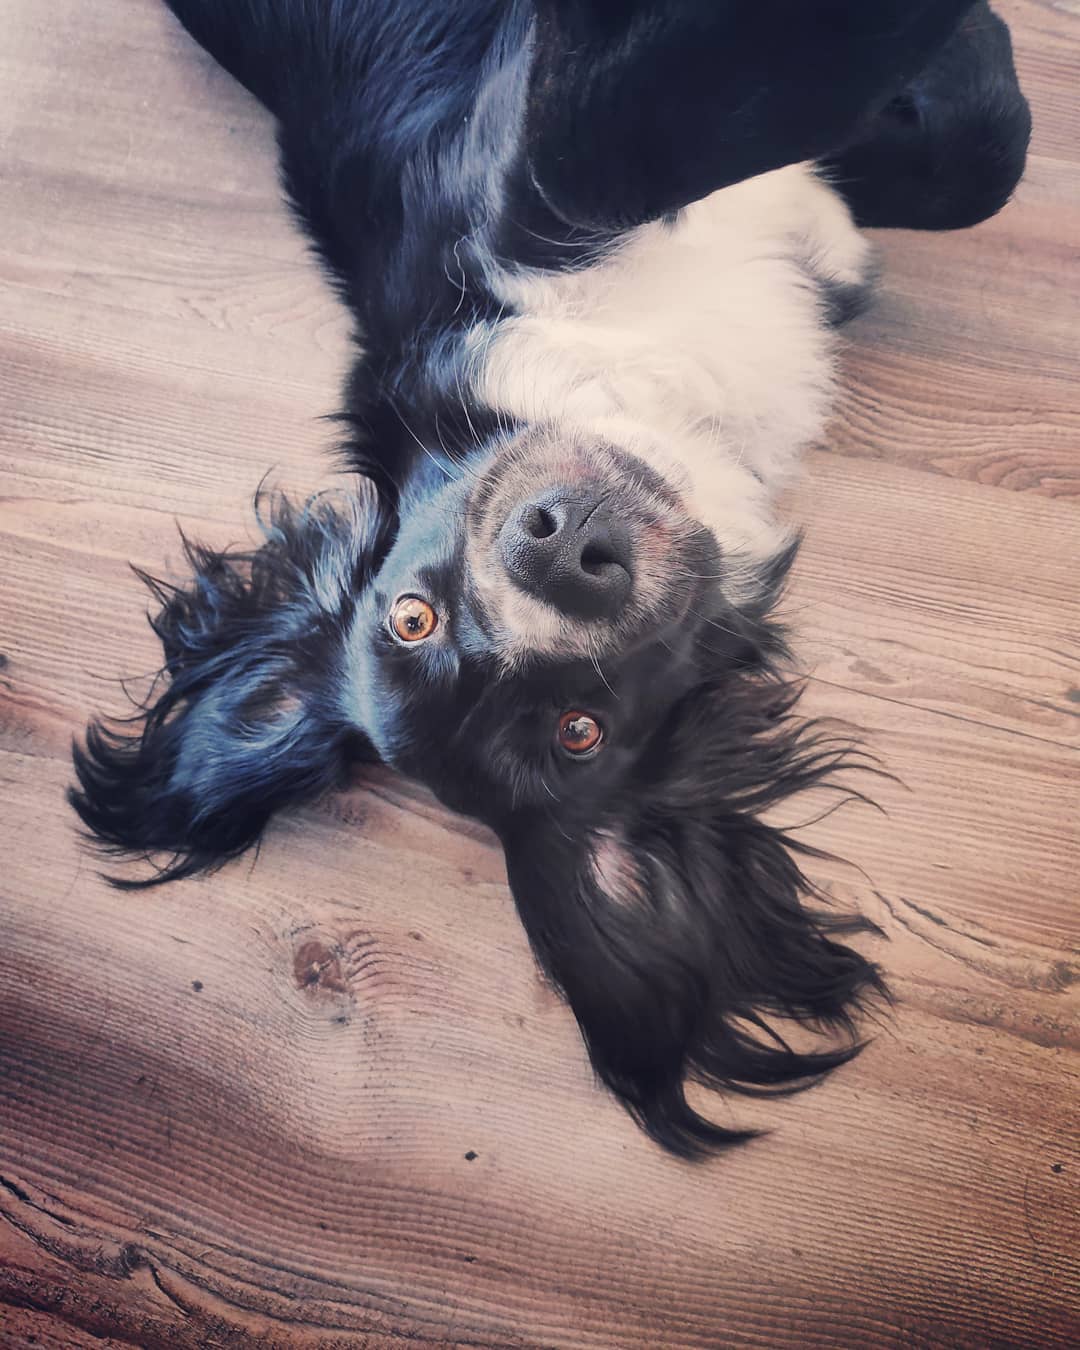 Border Collie lying upside down on the wooden floor